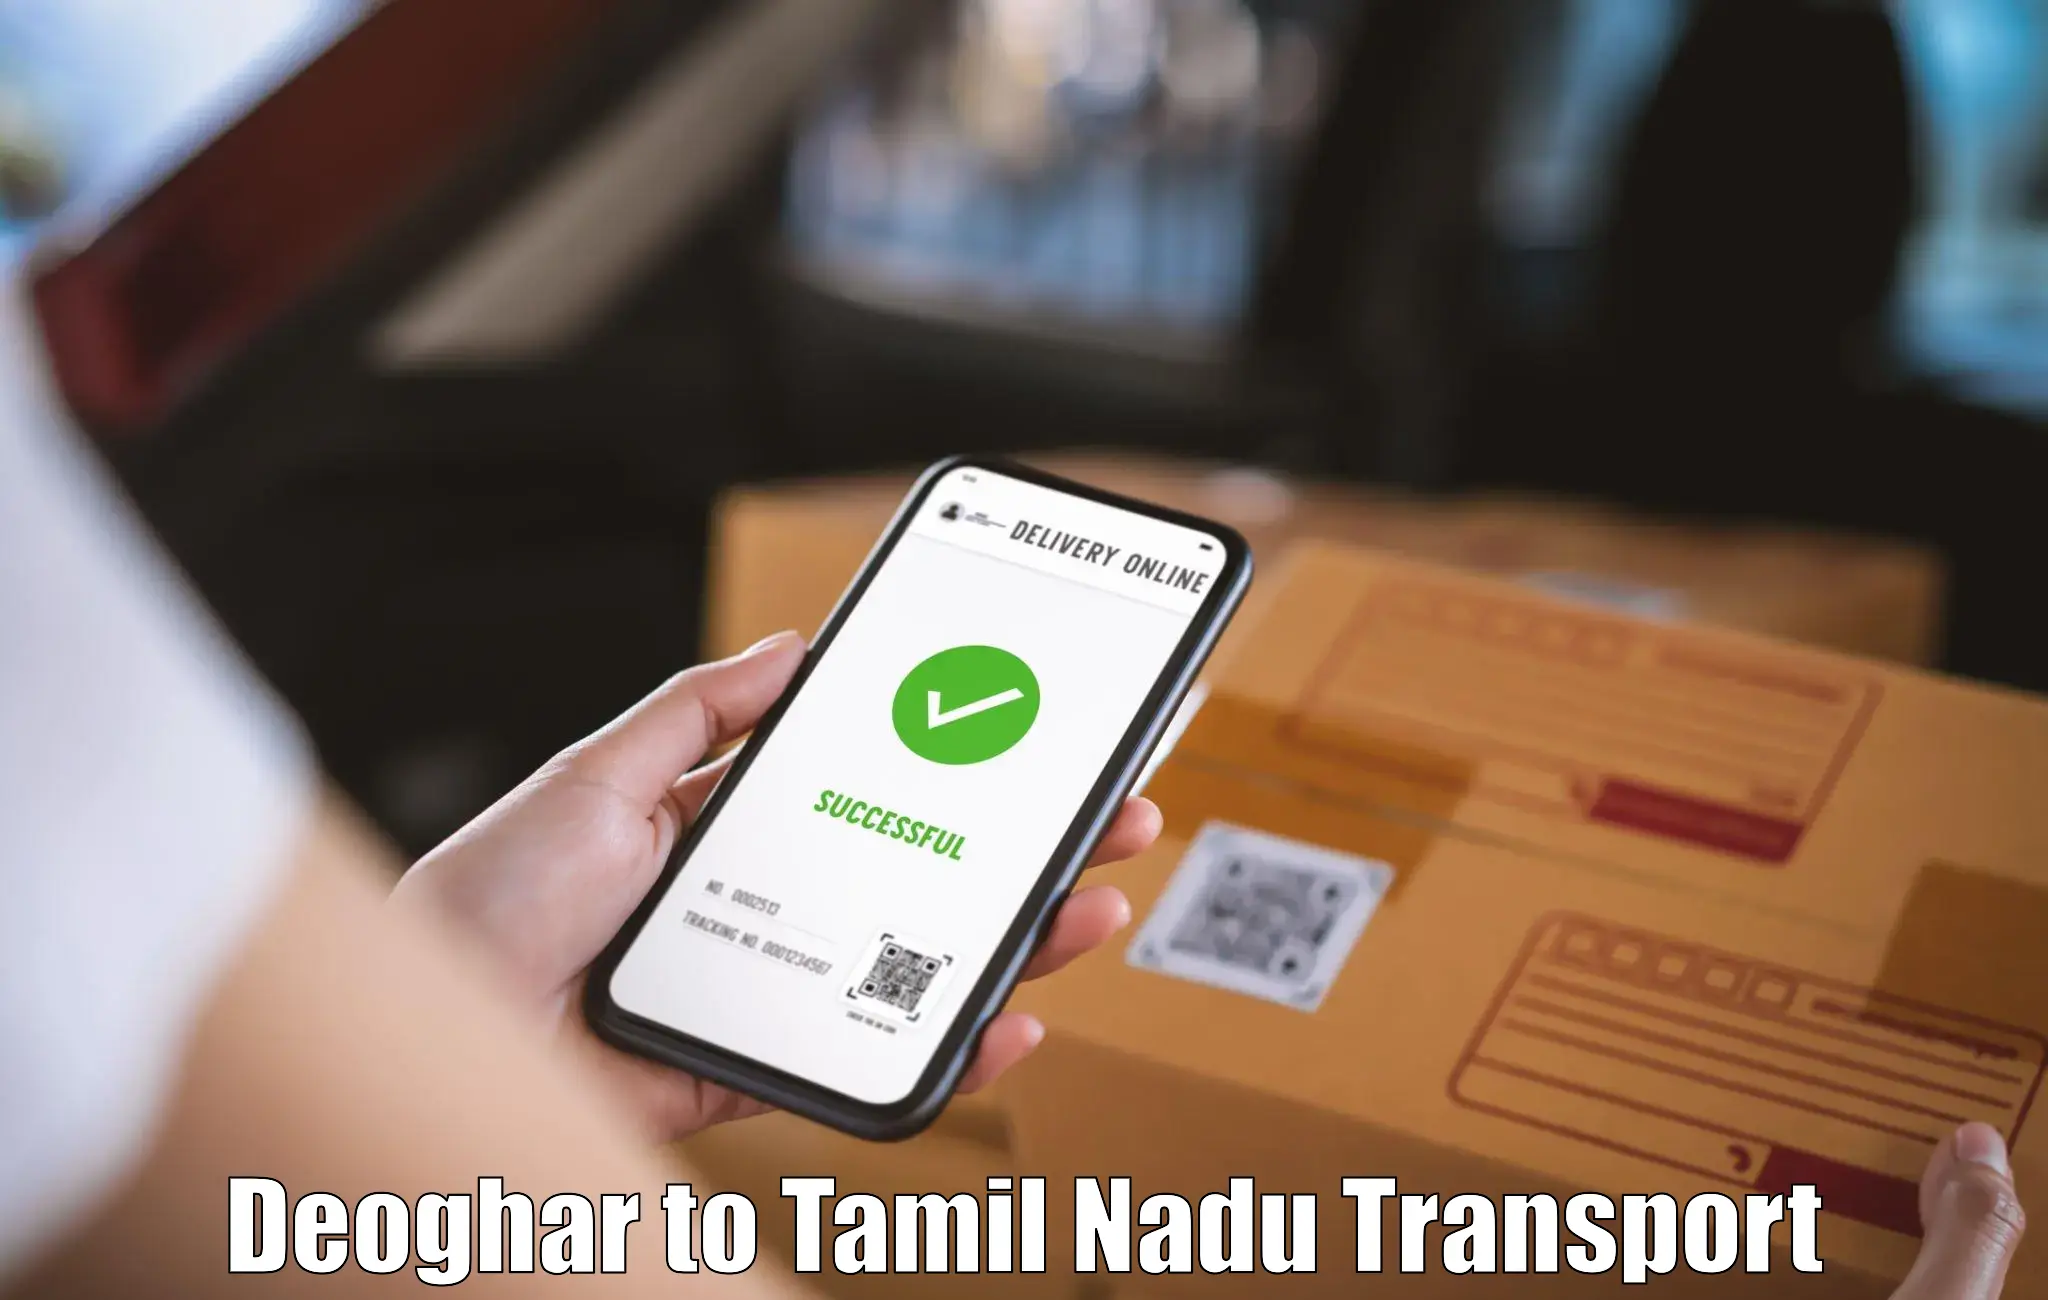 Domestic goods transportation services Deoghar to Palani